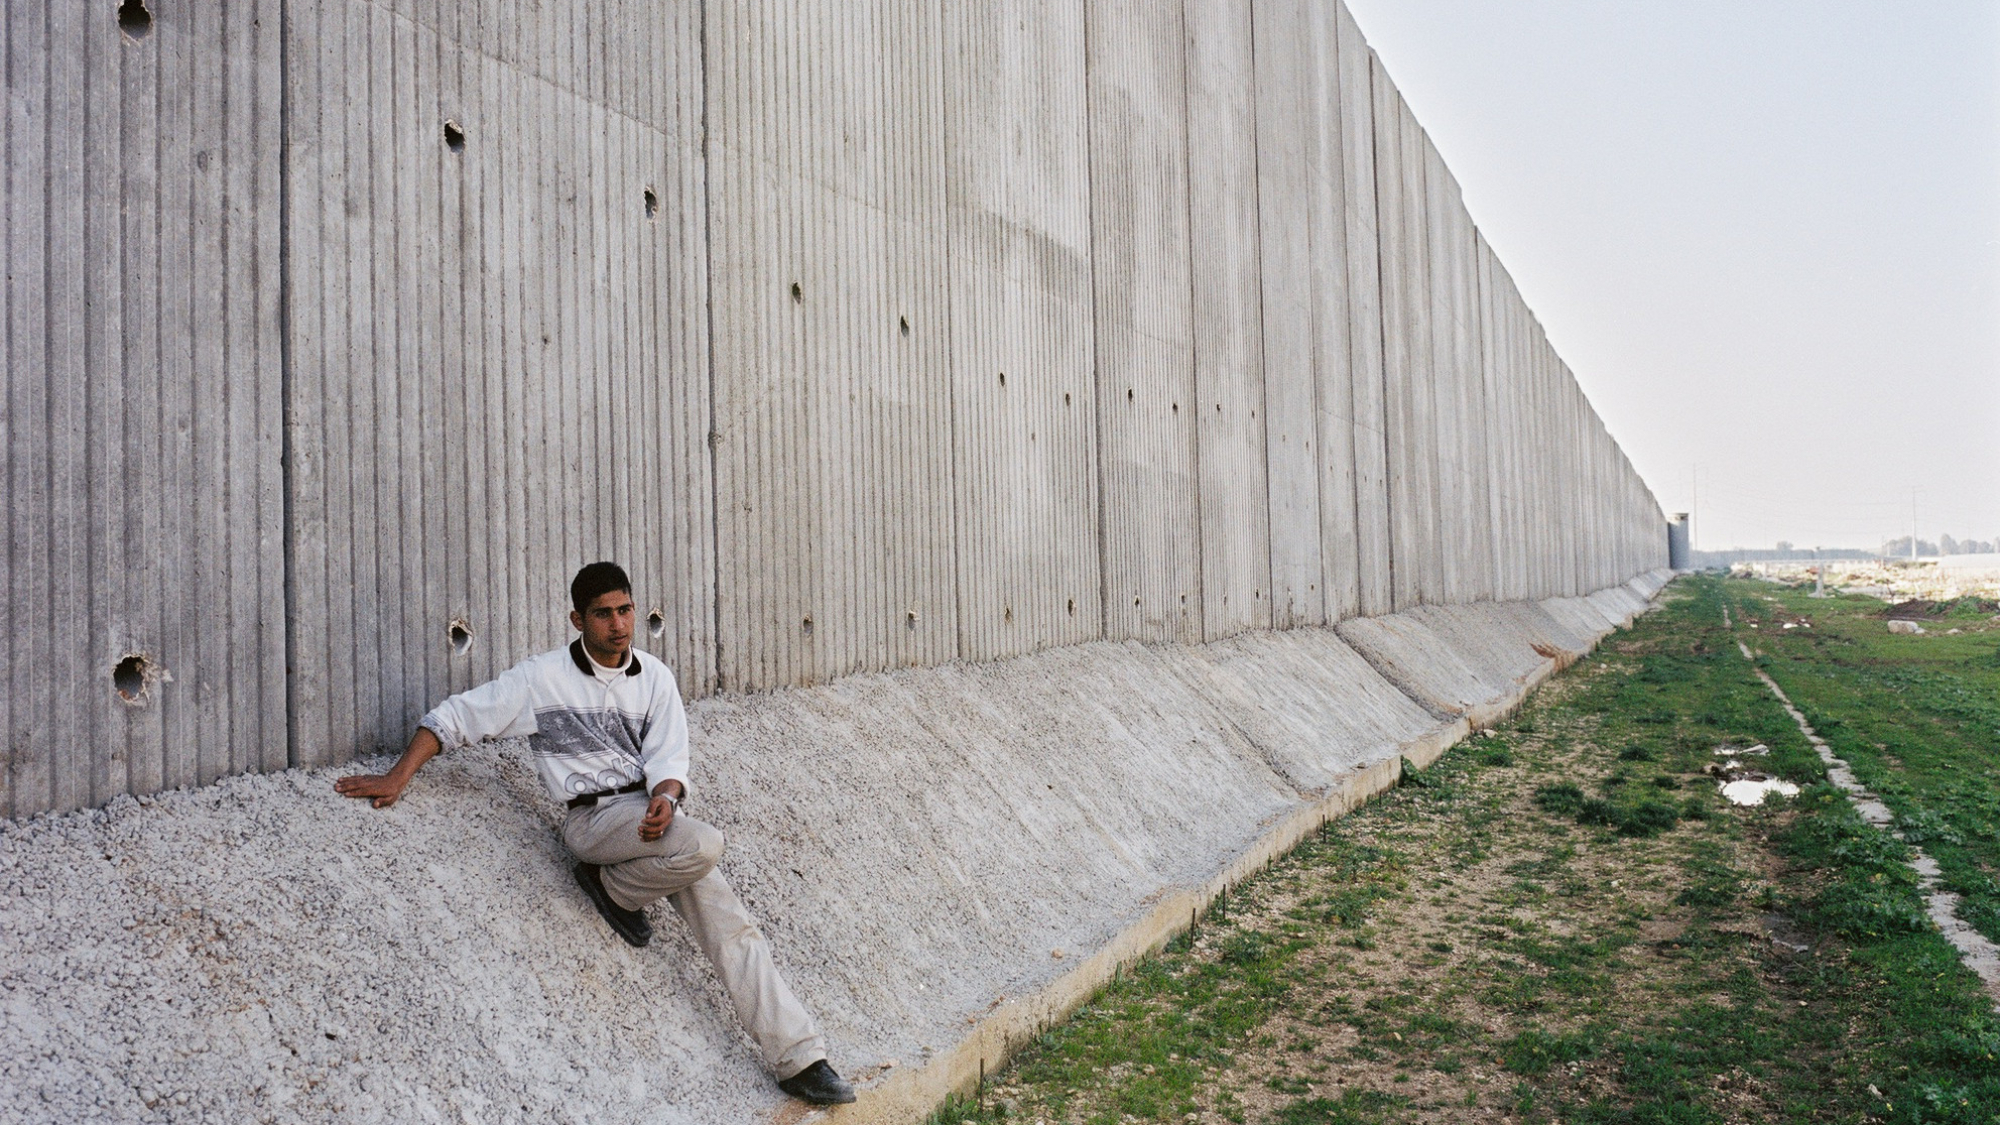 The purpose of the project was to investigate the construction of the wall in the occupied territories in Palestine and on the disputed border between Palestine and Israel.